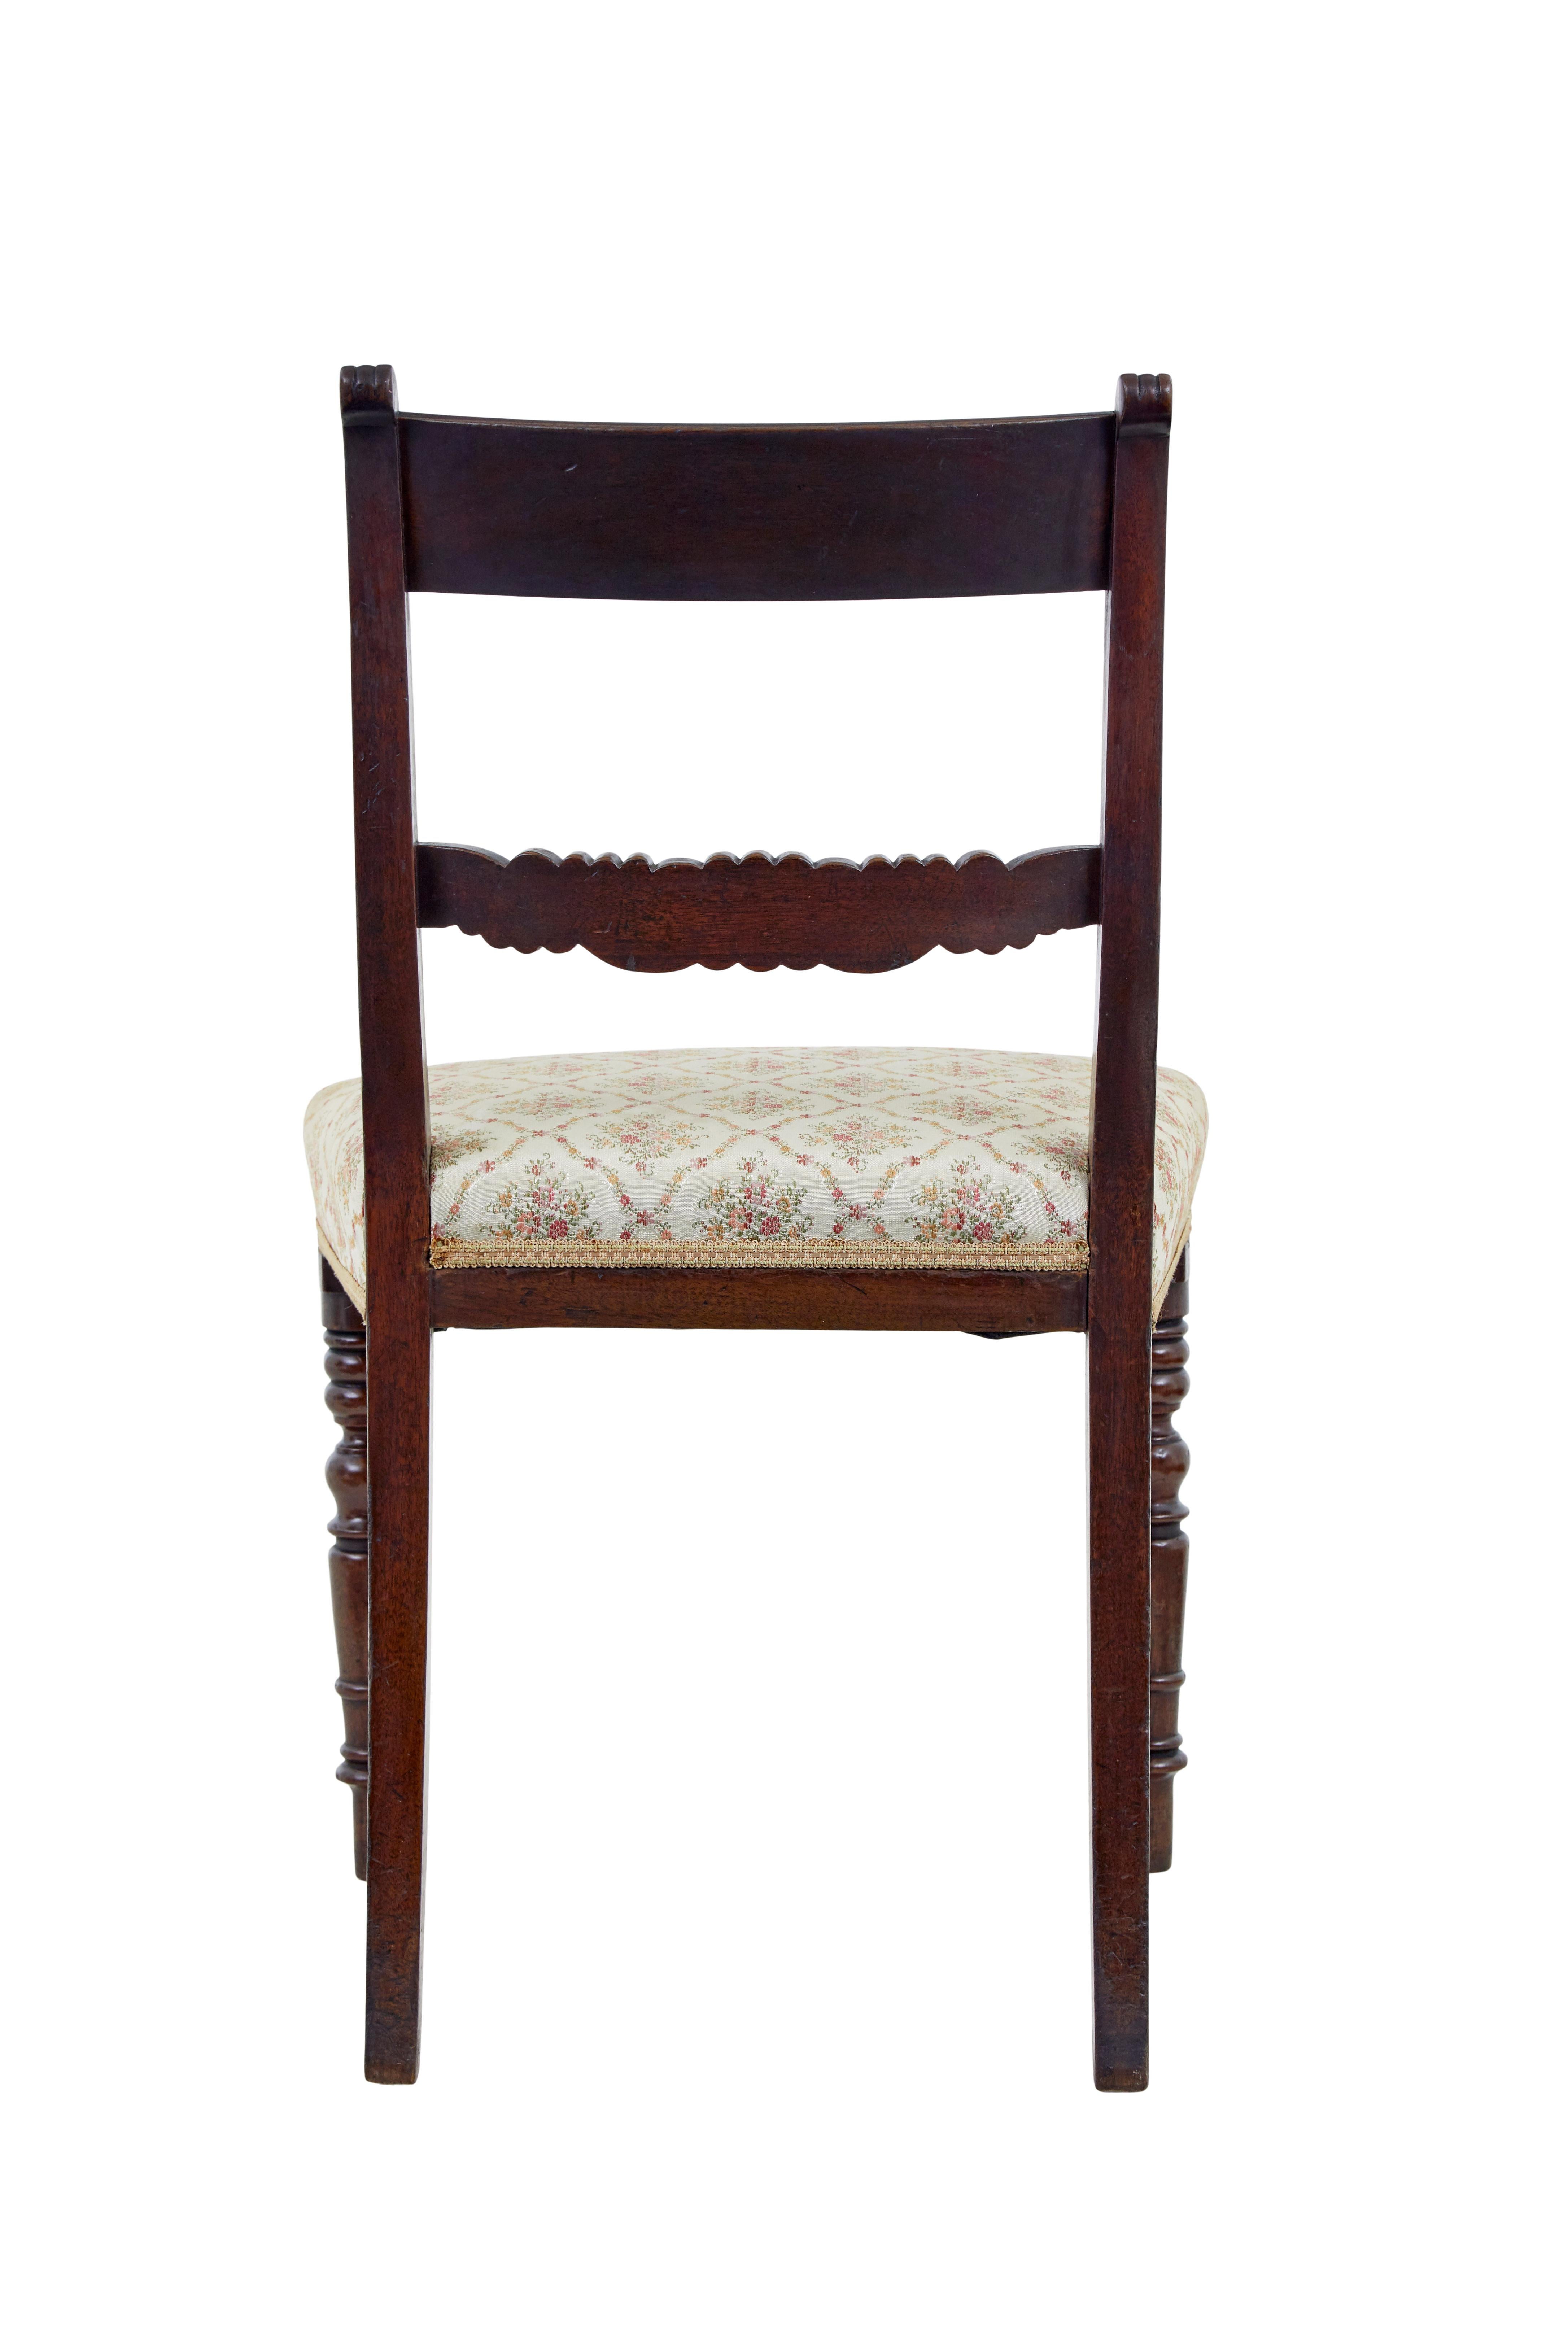 Set of 6 19th century Regency mahogany dining chairs In Good Condition For Sale In Debenham, Suffolk